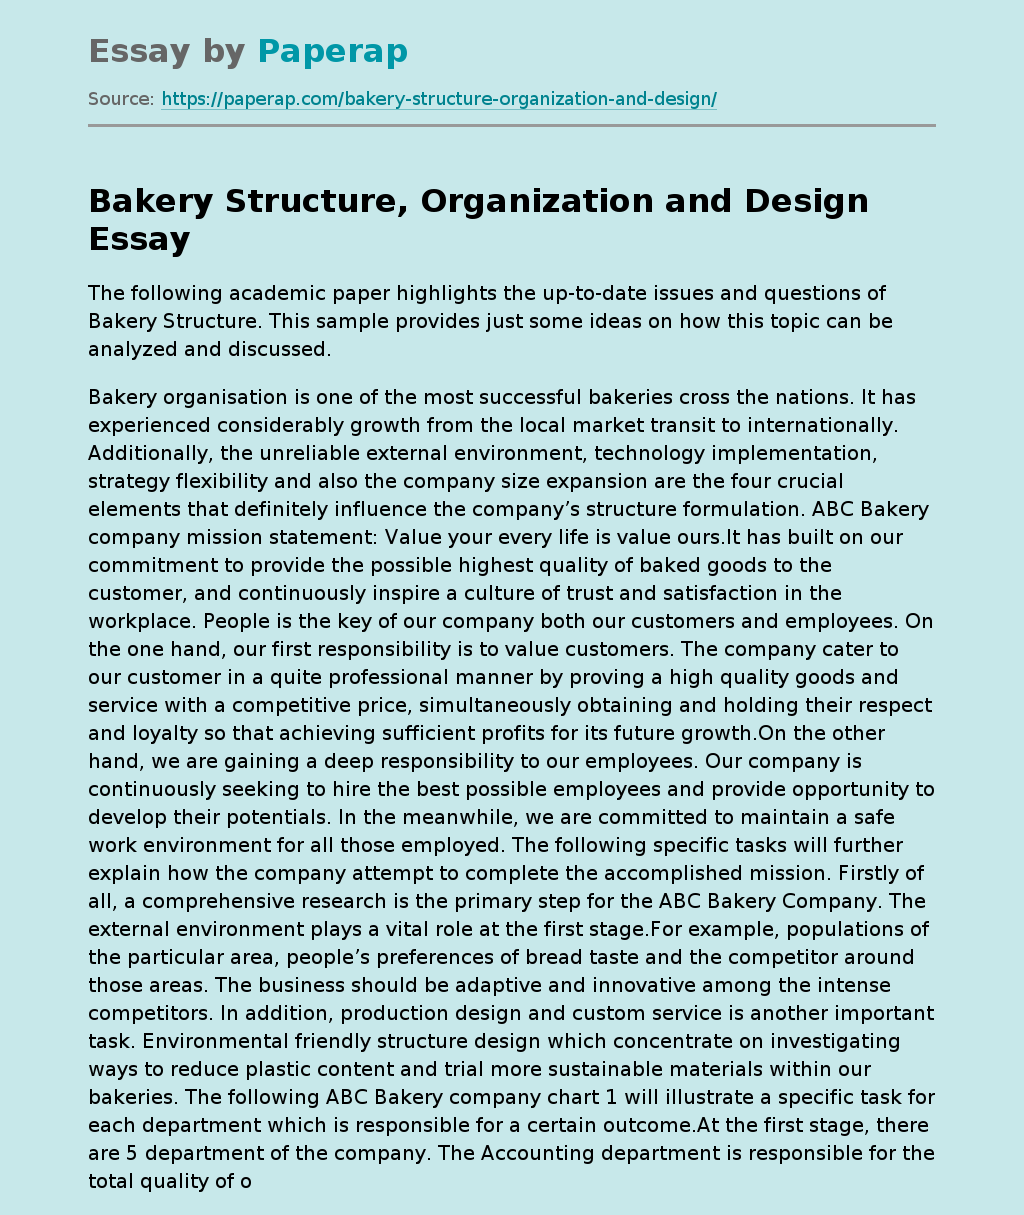 Bakery Structure, Organization and Design